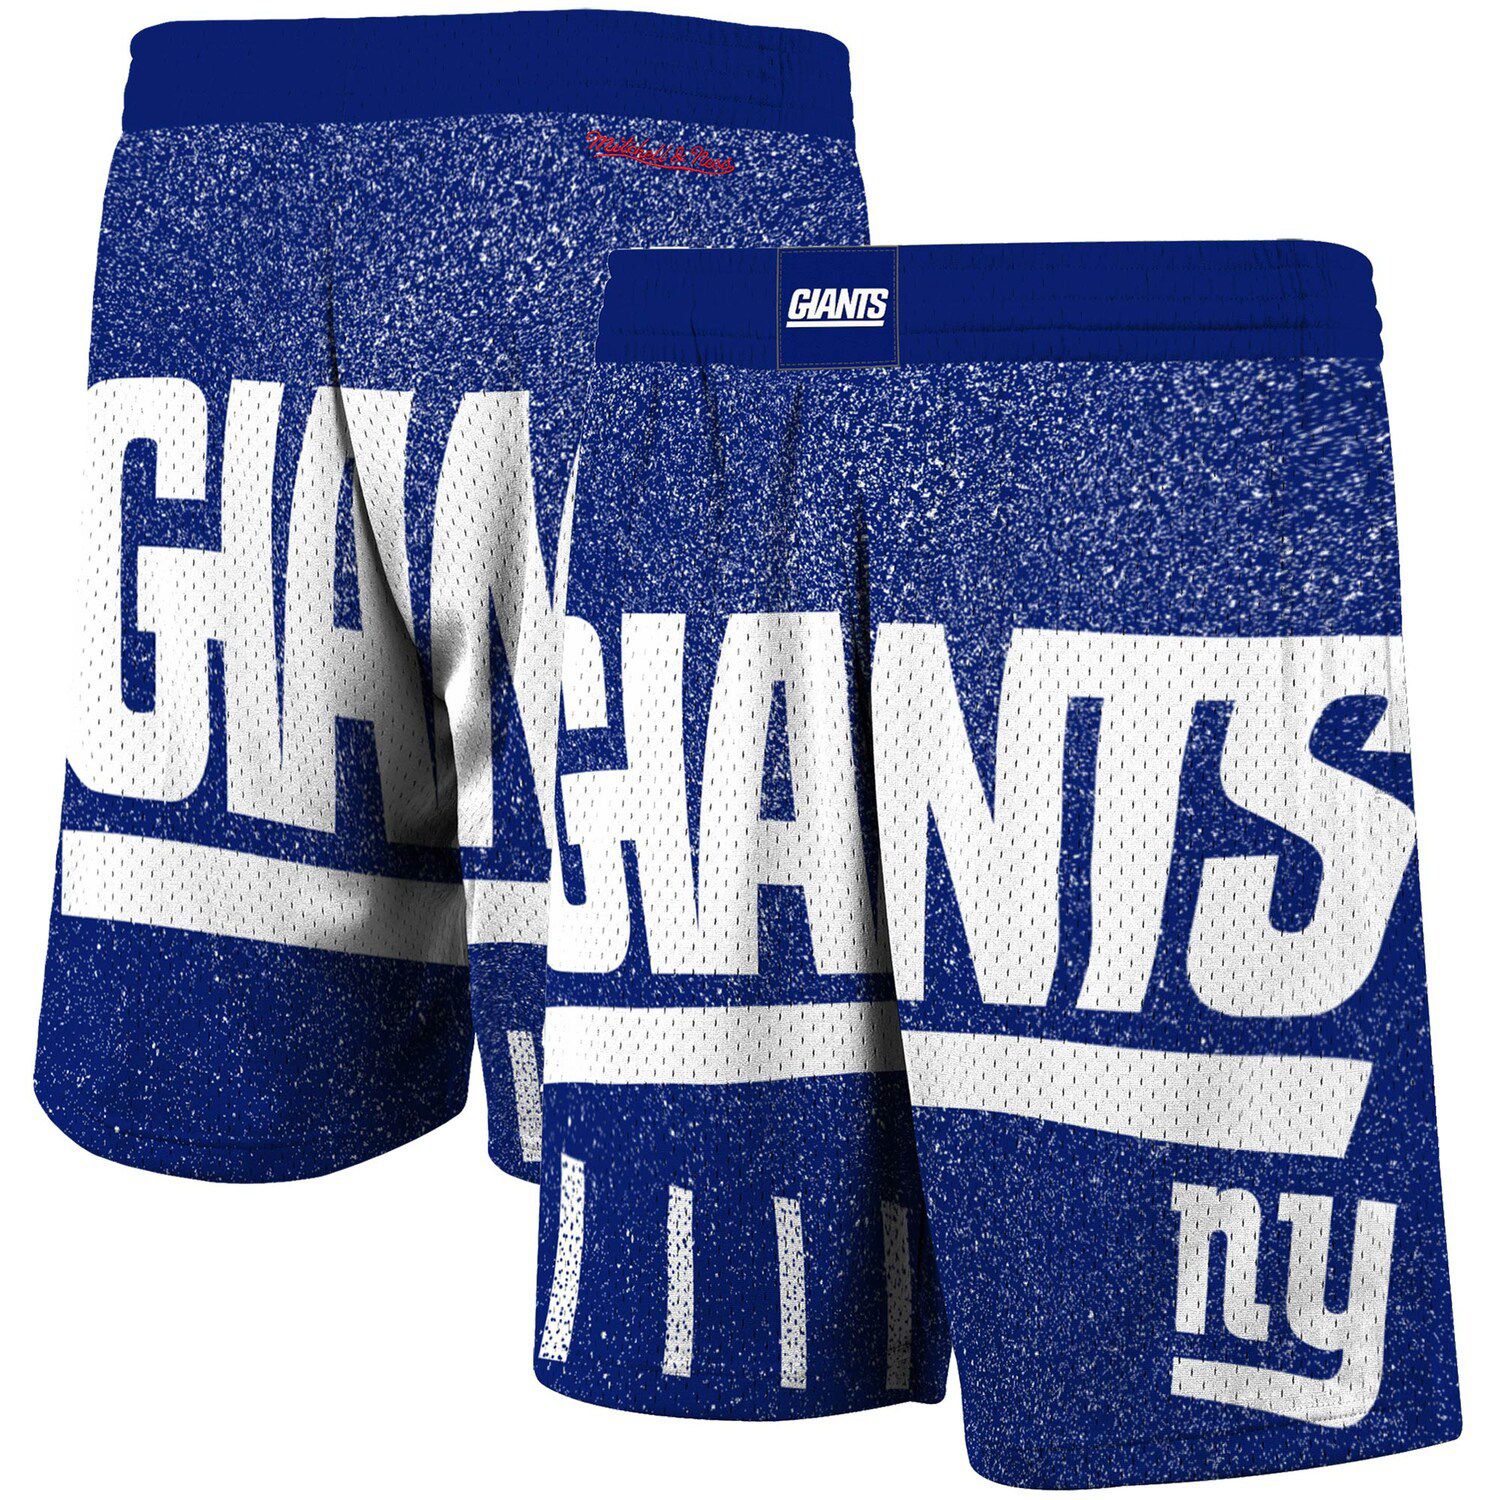 Image for Unbranded Men's Mitchell & Ness Royal New York Giants Jumbotron Shorts at Kohl's.